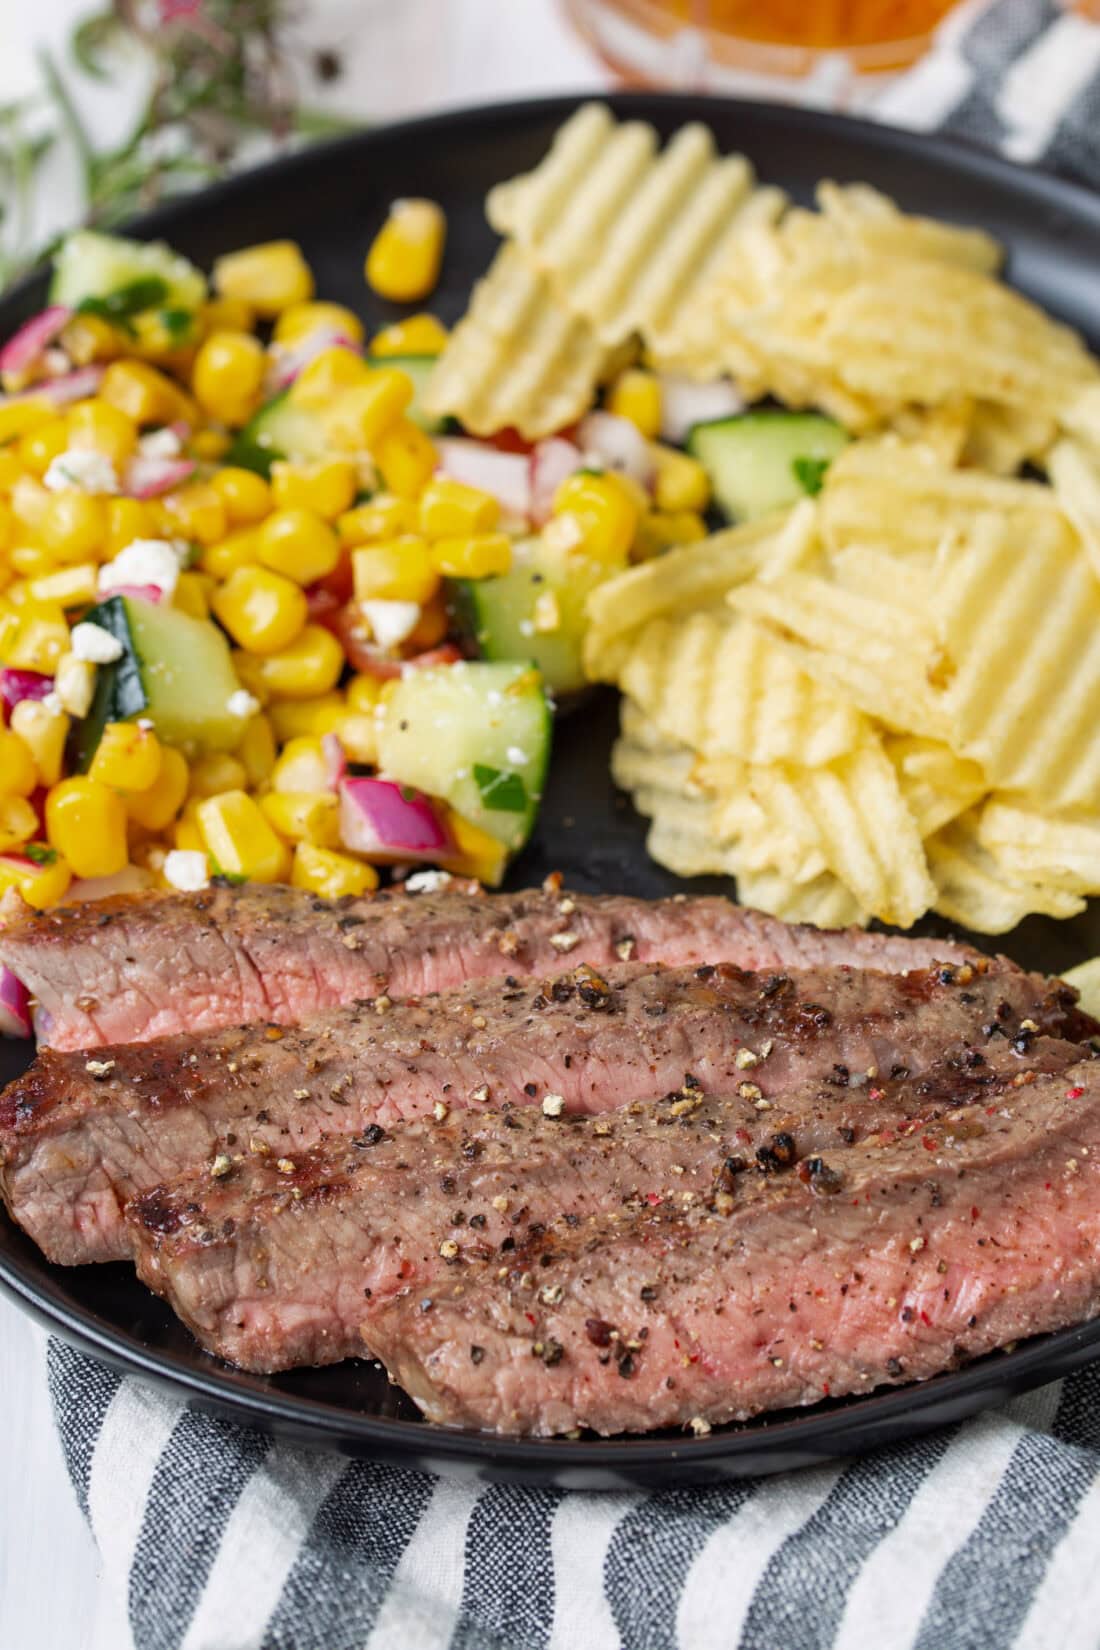 Grilled New York Strip Steak on a plate with corn